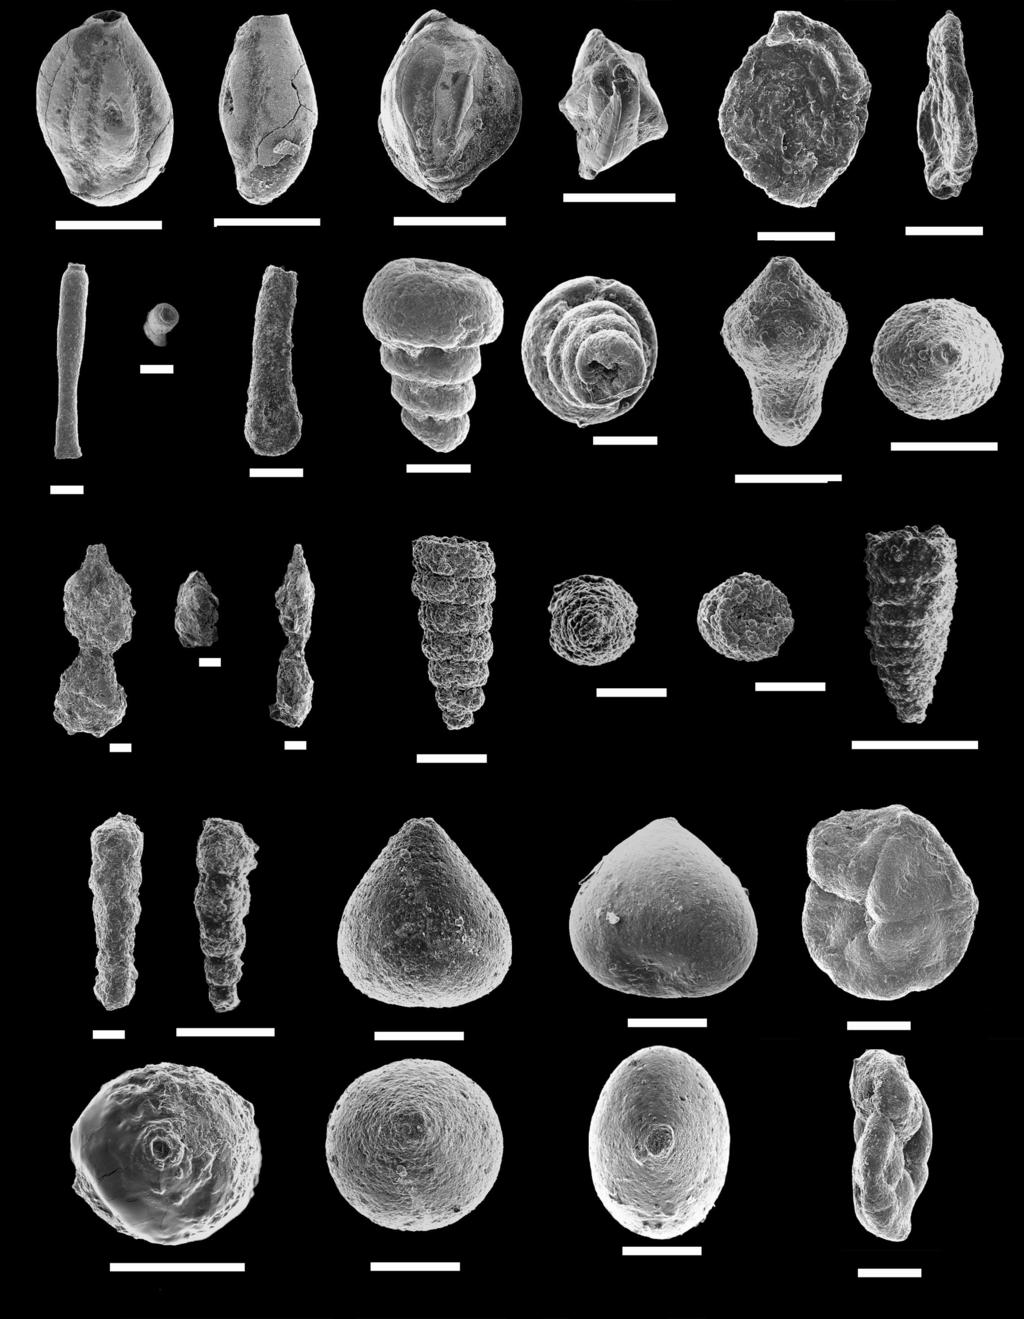 PATTERSON, HAGGART, & DALBY: CRETACEOUS FORAMINIFERA OF B.C. FIGURE 5. All scale bars = 100 um, unless otherwise indicated. 1, 2, Miliammina manitobensis Wickenden 1932, GSC No.